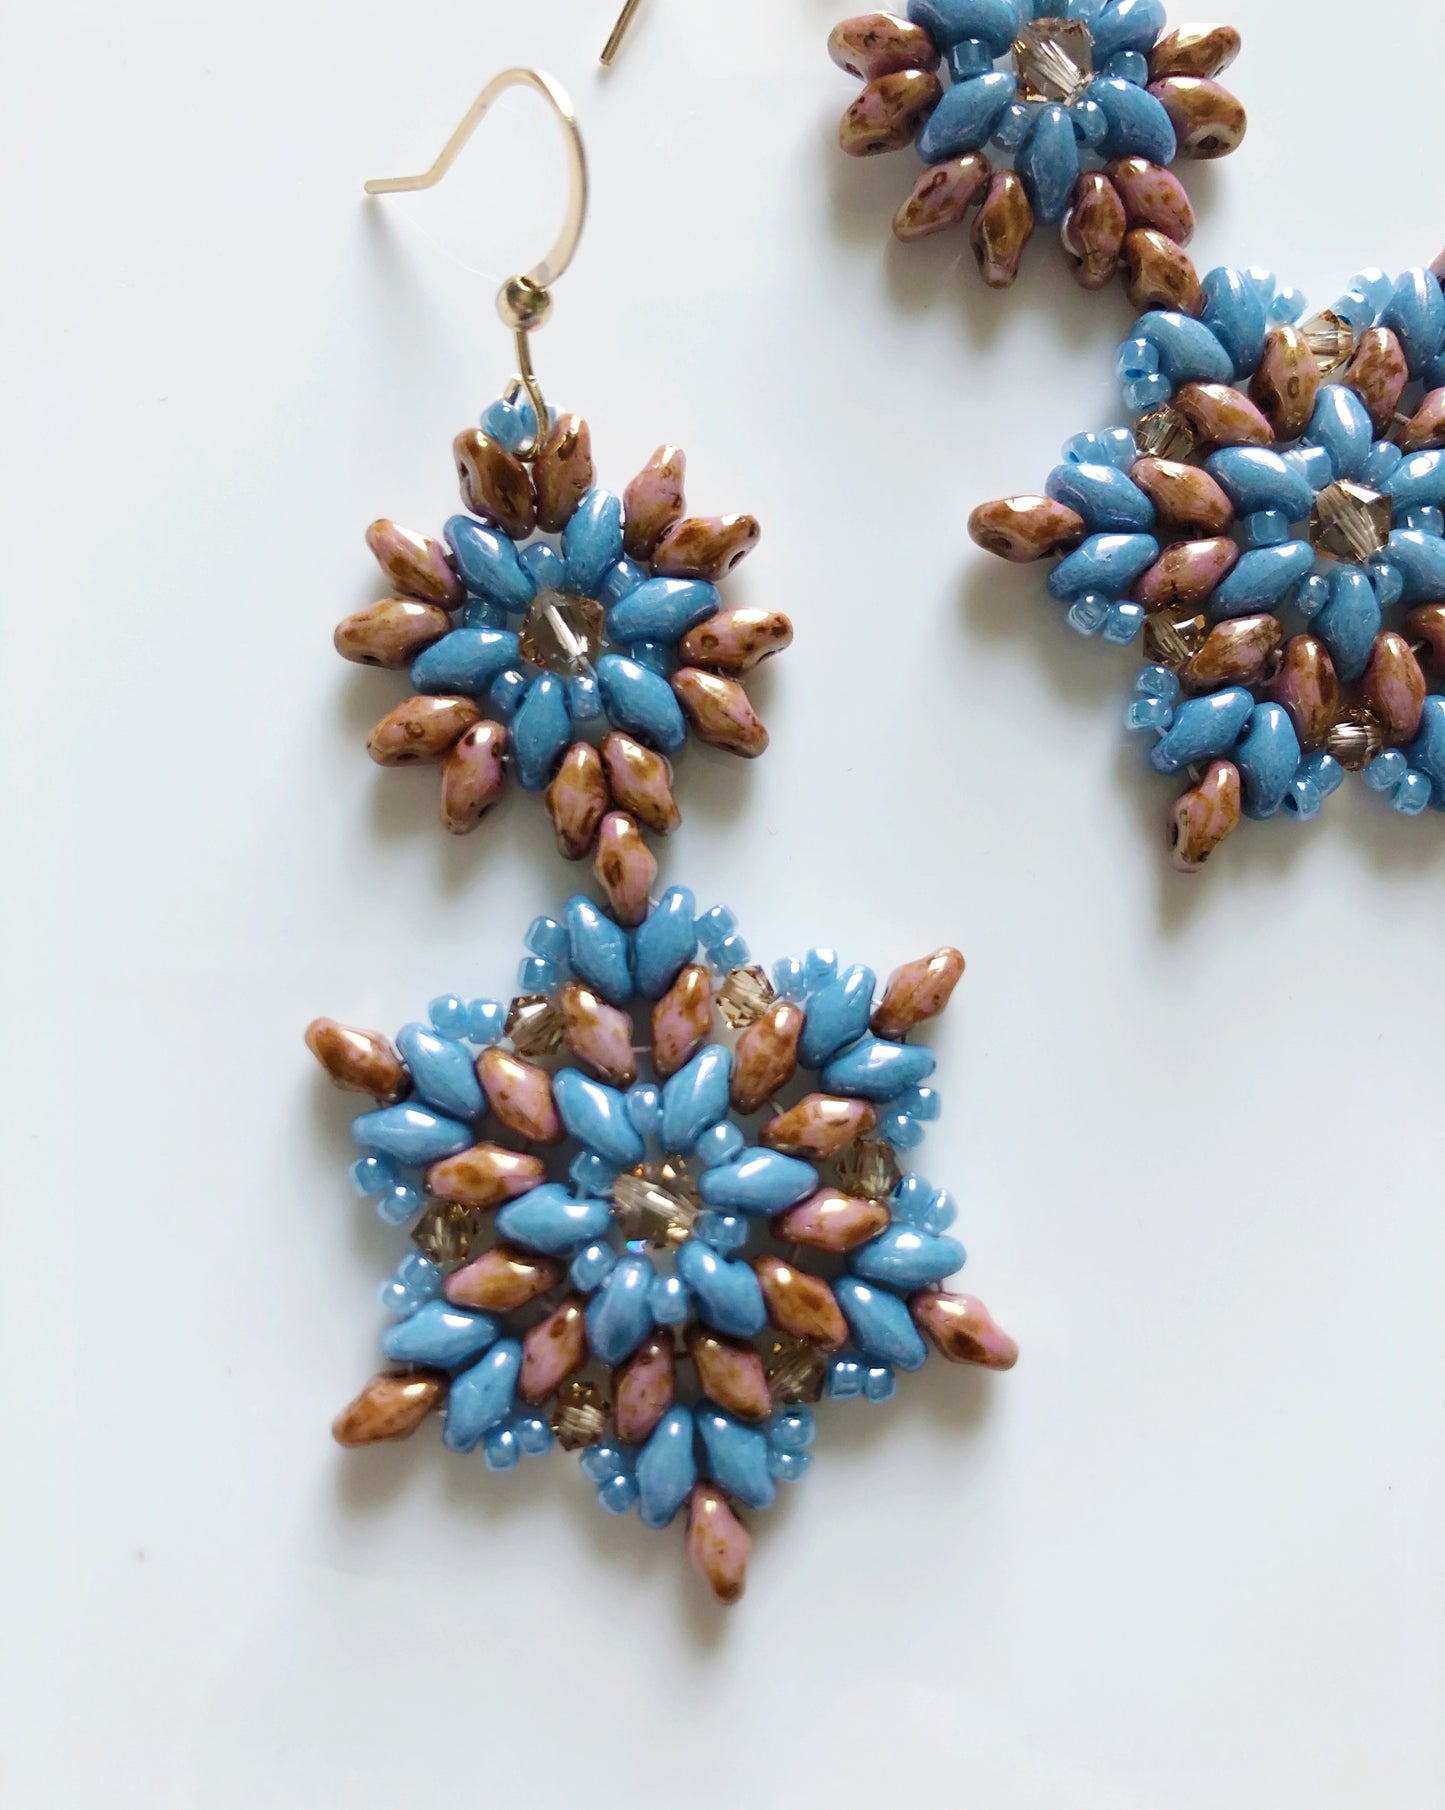 Snowflakes glass and crystals earrings in blue and brown